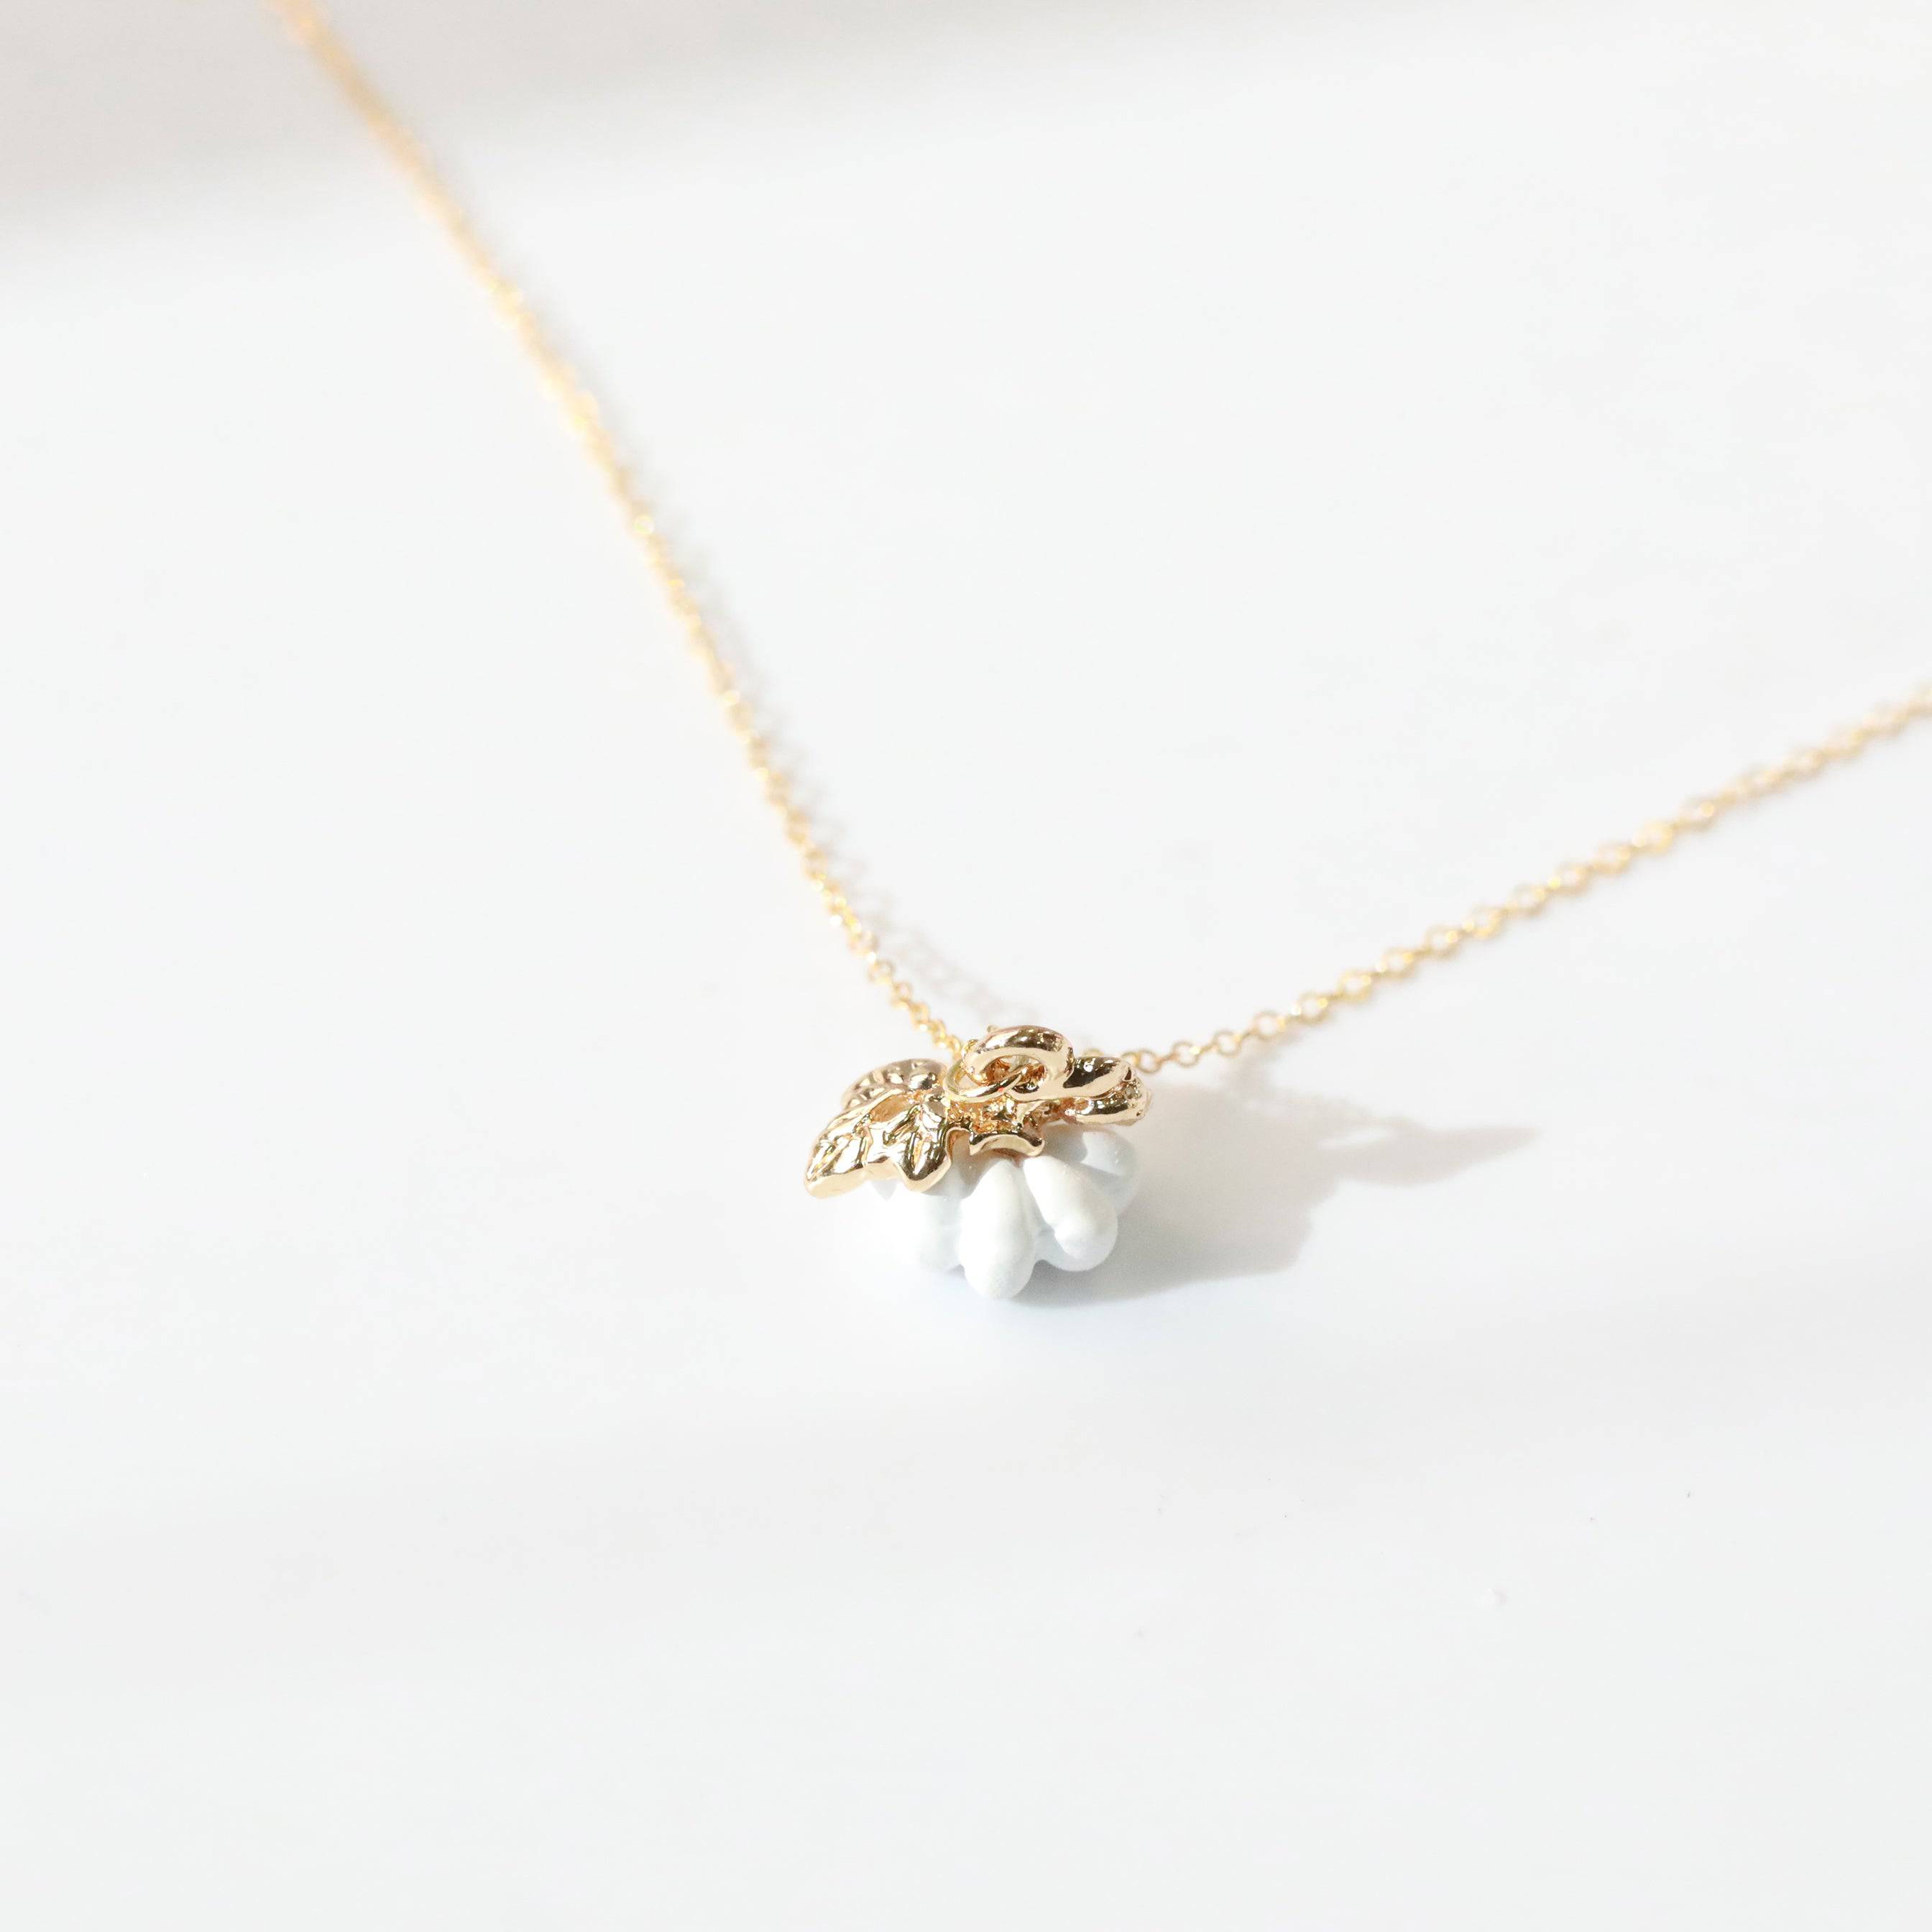 Dainty Pumpkin Necklace - The Gilded Witch